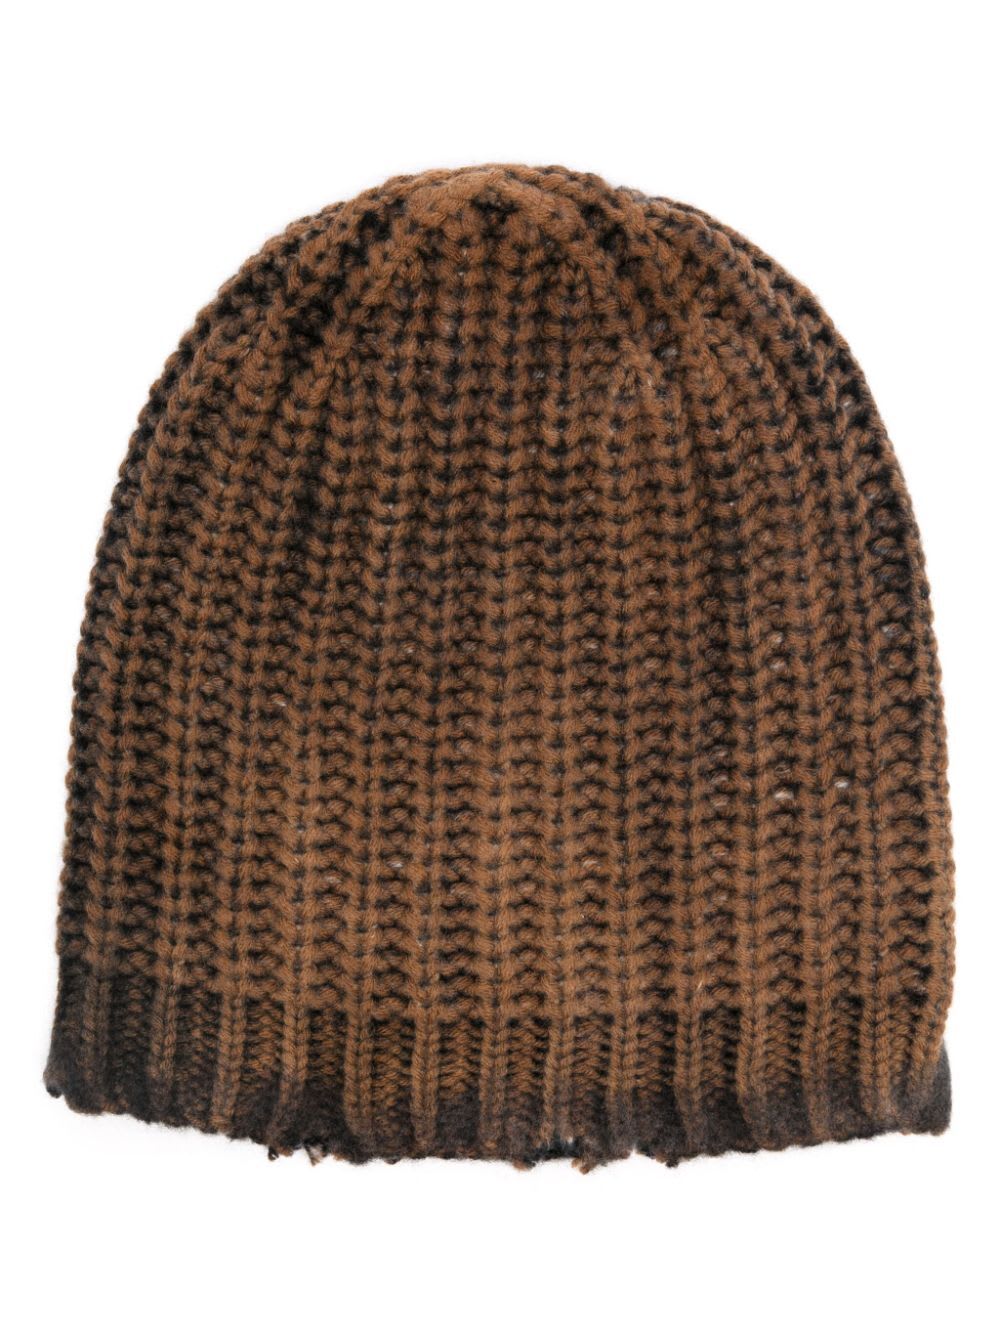 Corn Cob Stitch Hat With Destroyed Effect